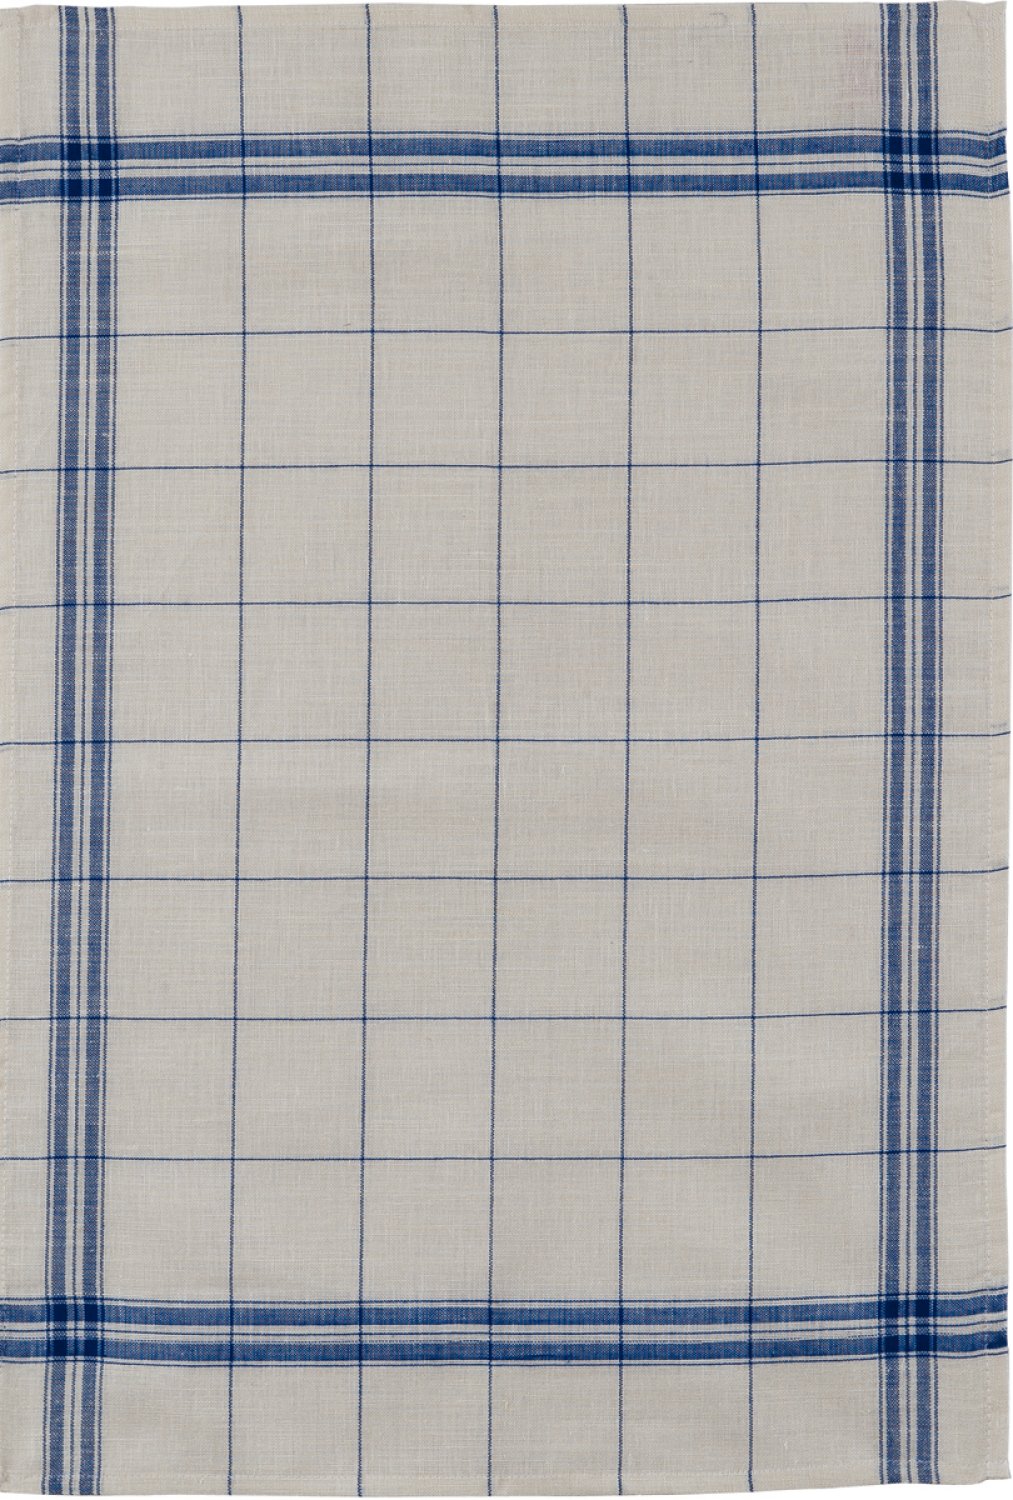 Coucke "Bistro Essential" (Blue), Woven linen tea towel. Made in France